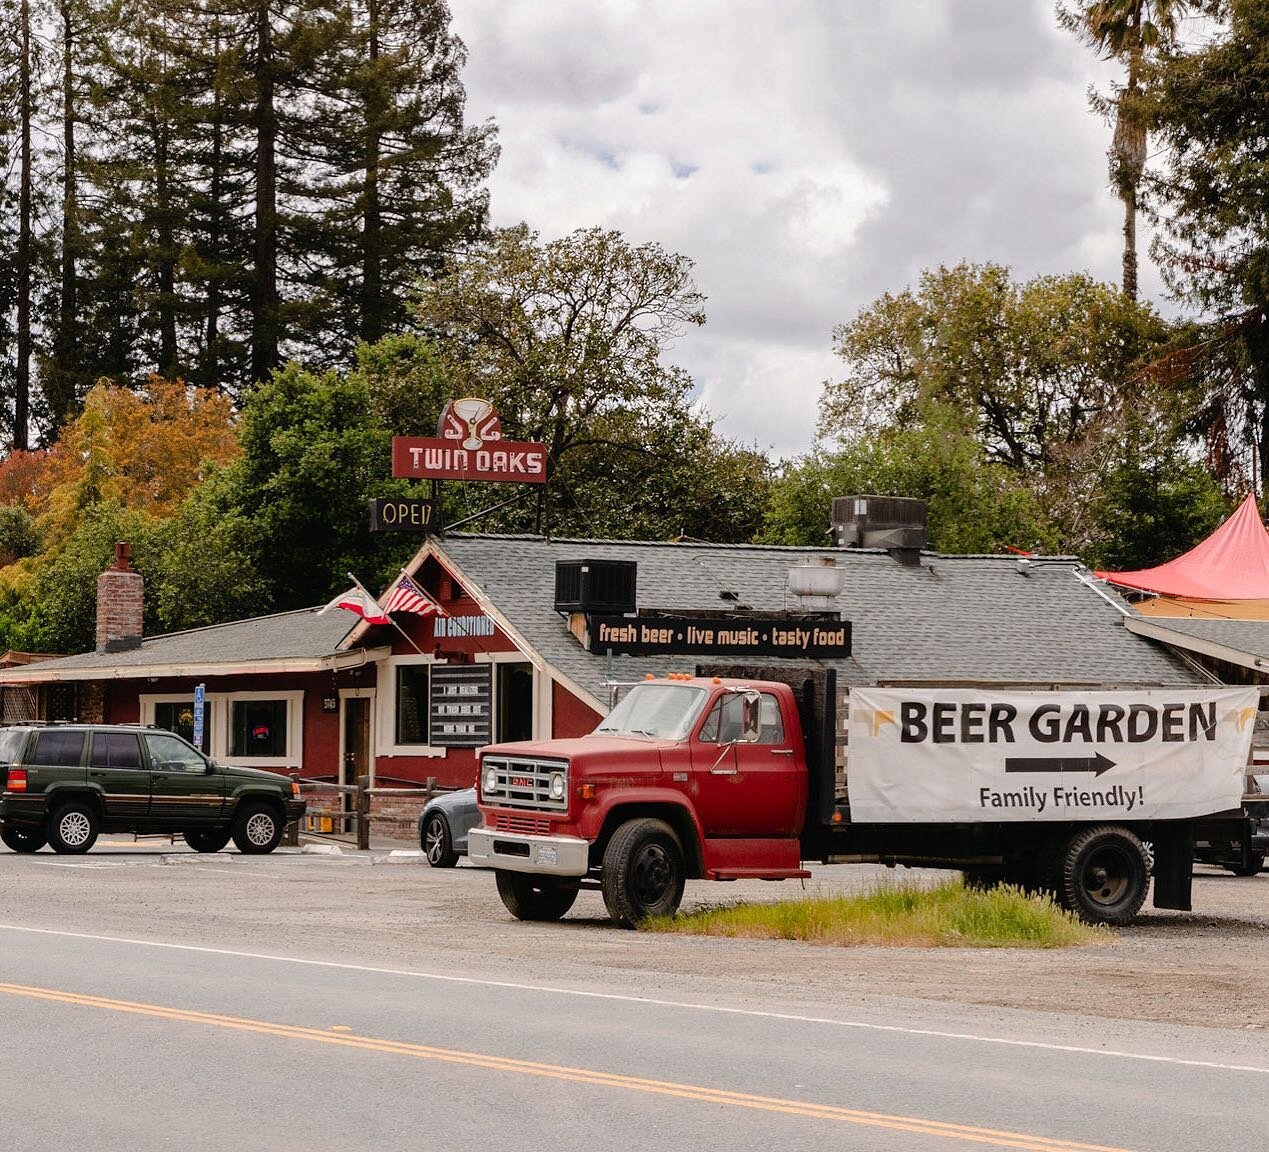 It&rsquo;s a good day to visit the #roadhouse ⛅️🍺🍔

📸credit: @travelagentapparel 

#penngrove #sonomacounty #cotati #oldredwoodhighway